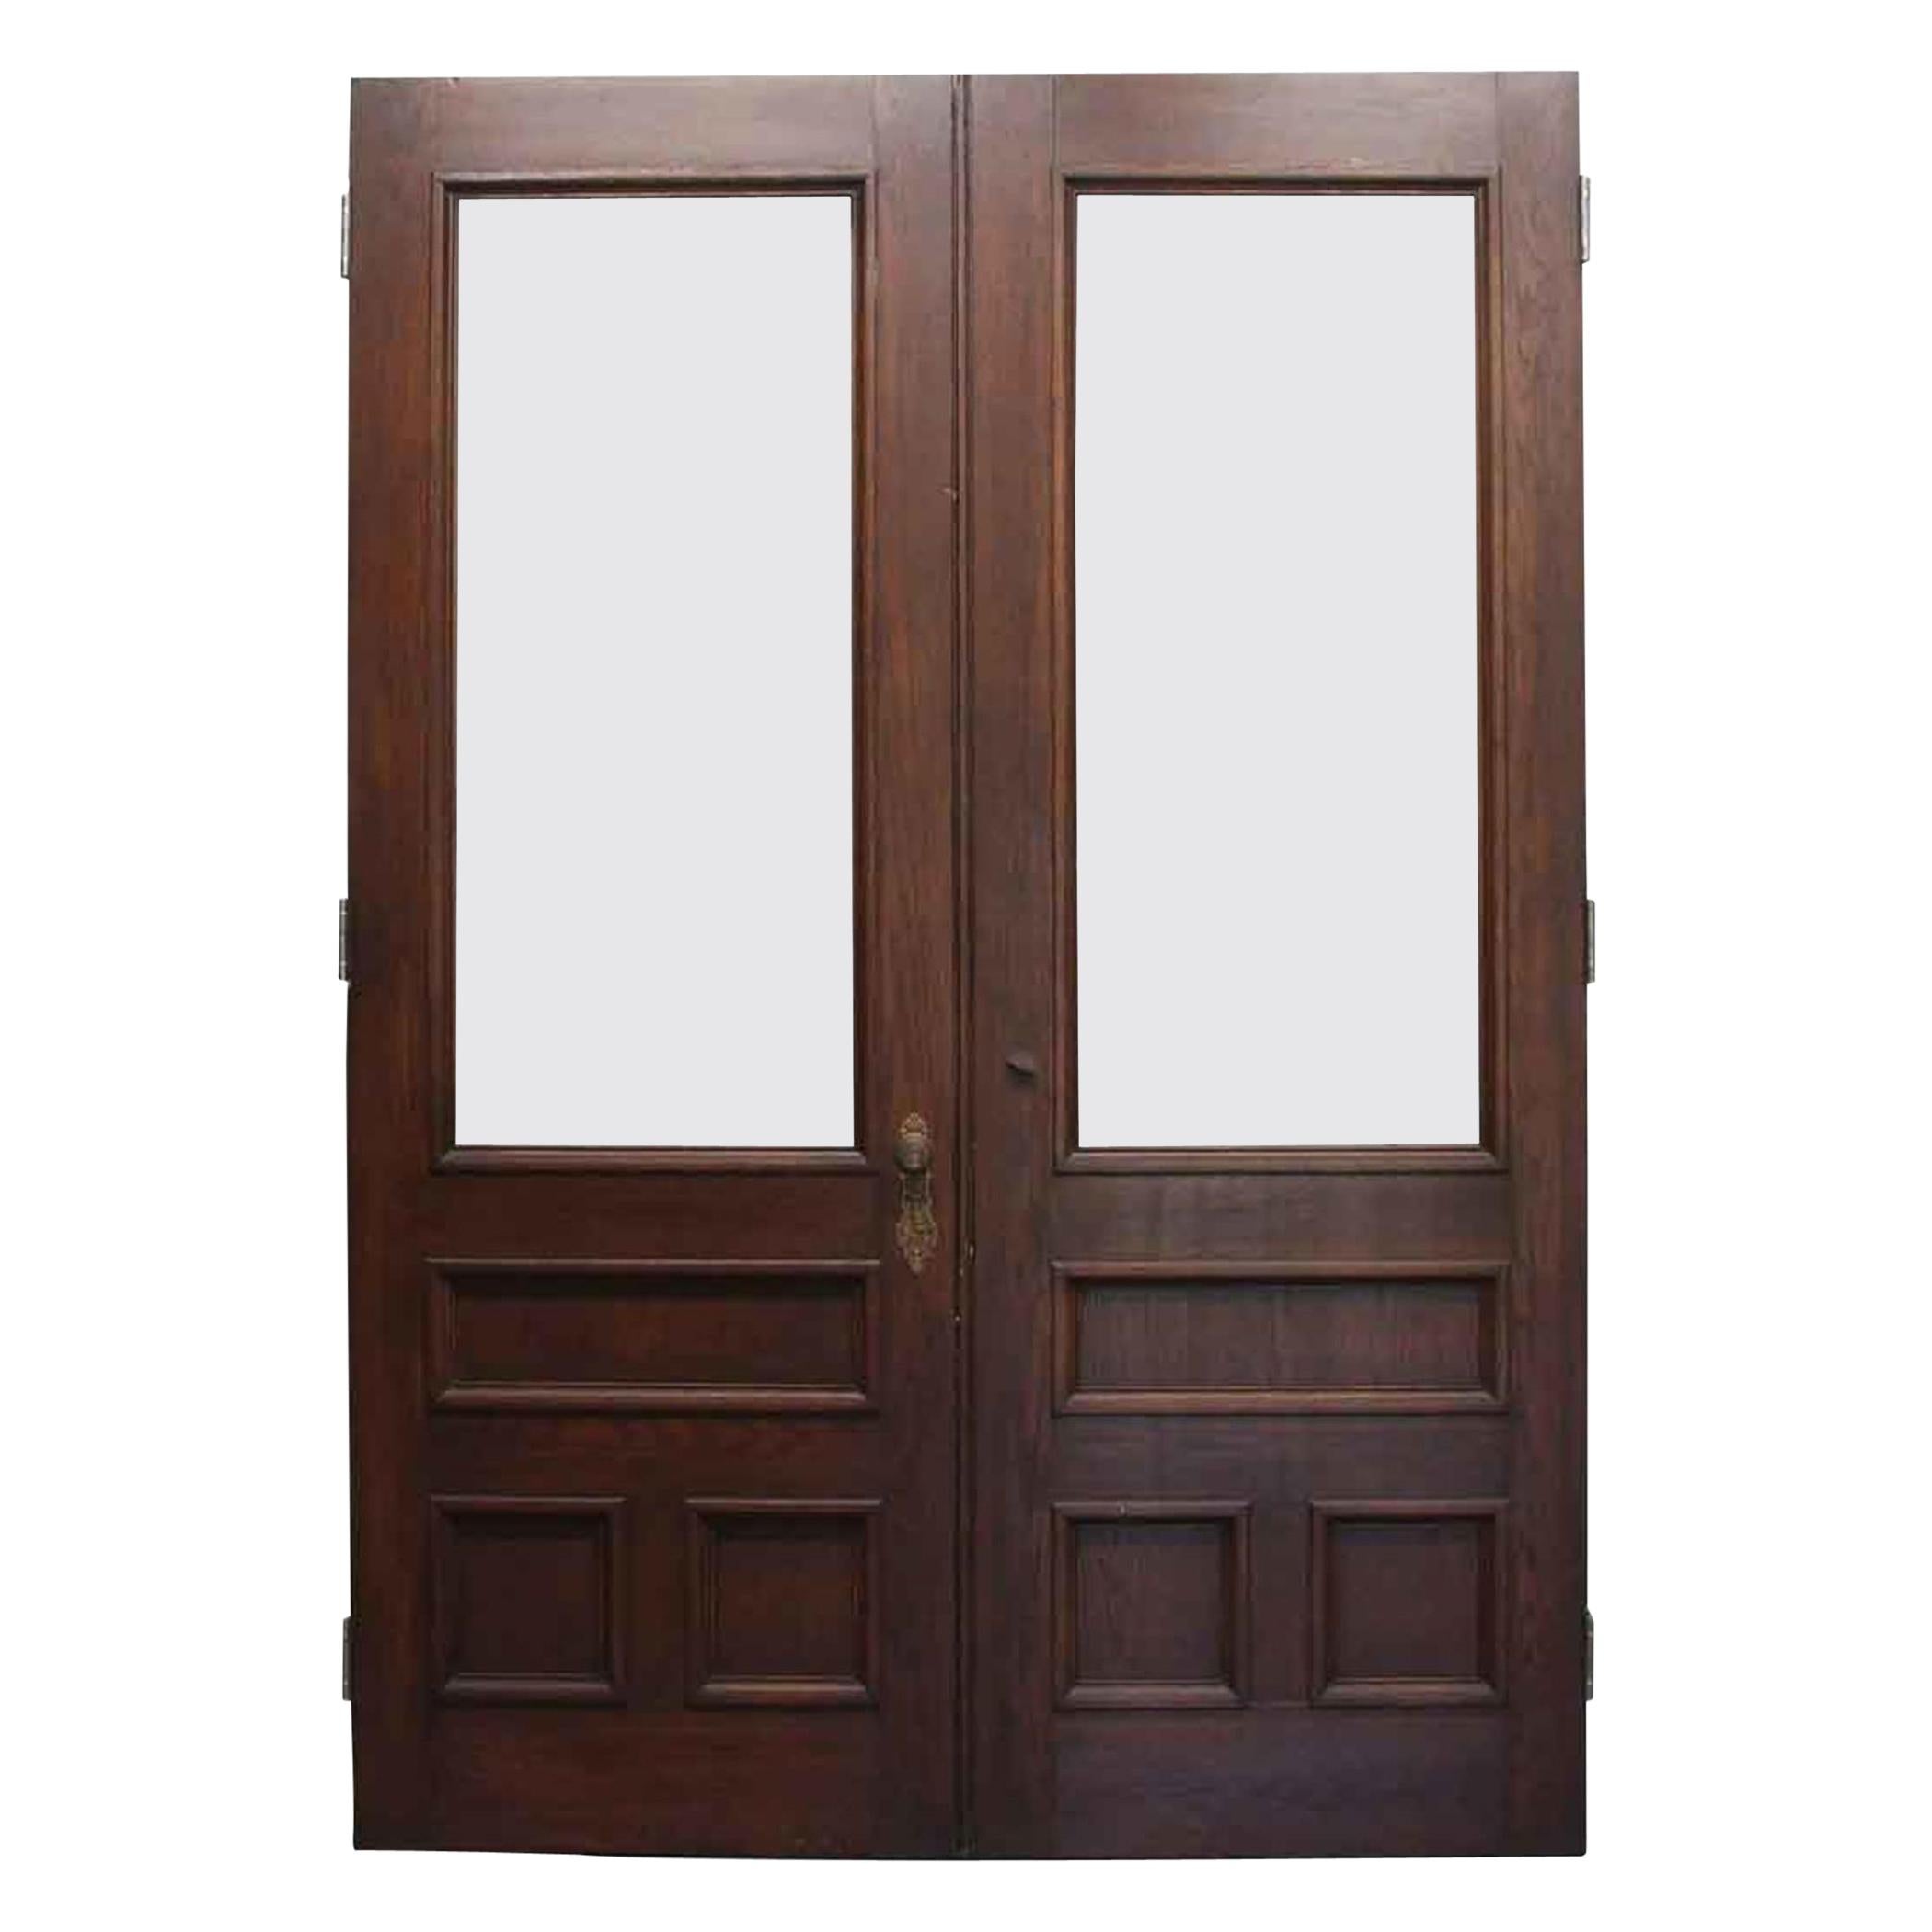 1890s Victorian American Chestnut Double Brownstone Doors with Glass